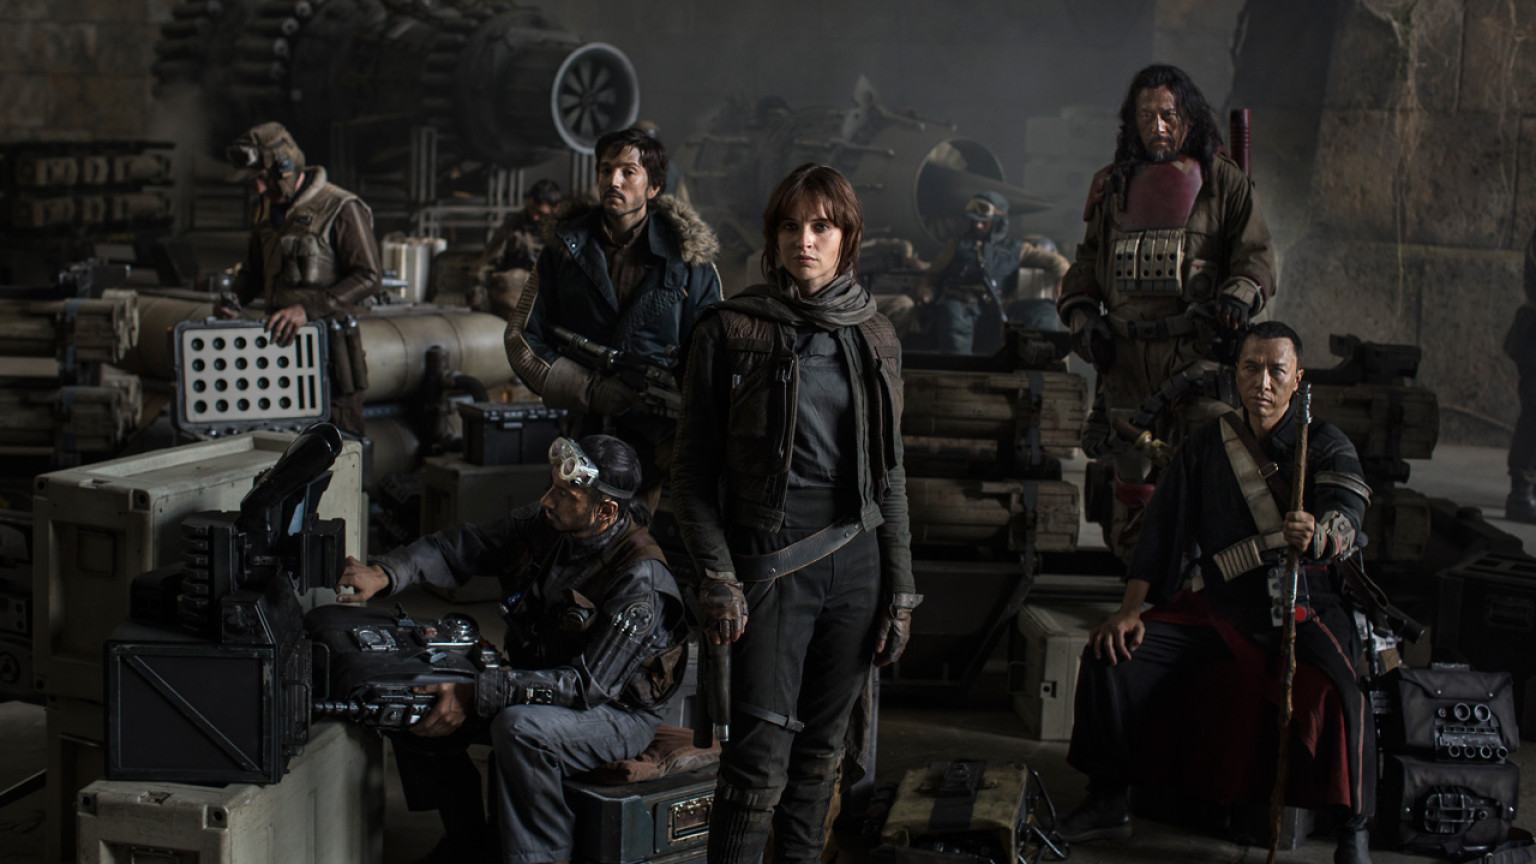 ROGUE ONE: A STAR WARS STORY – New Teaser Trailer Debuts Tomorrow